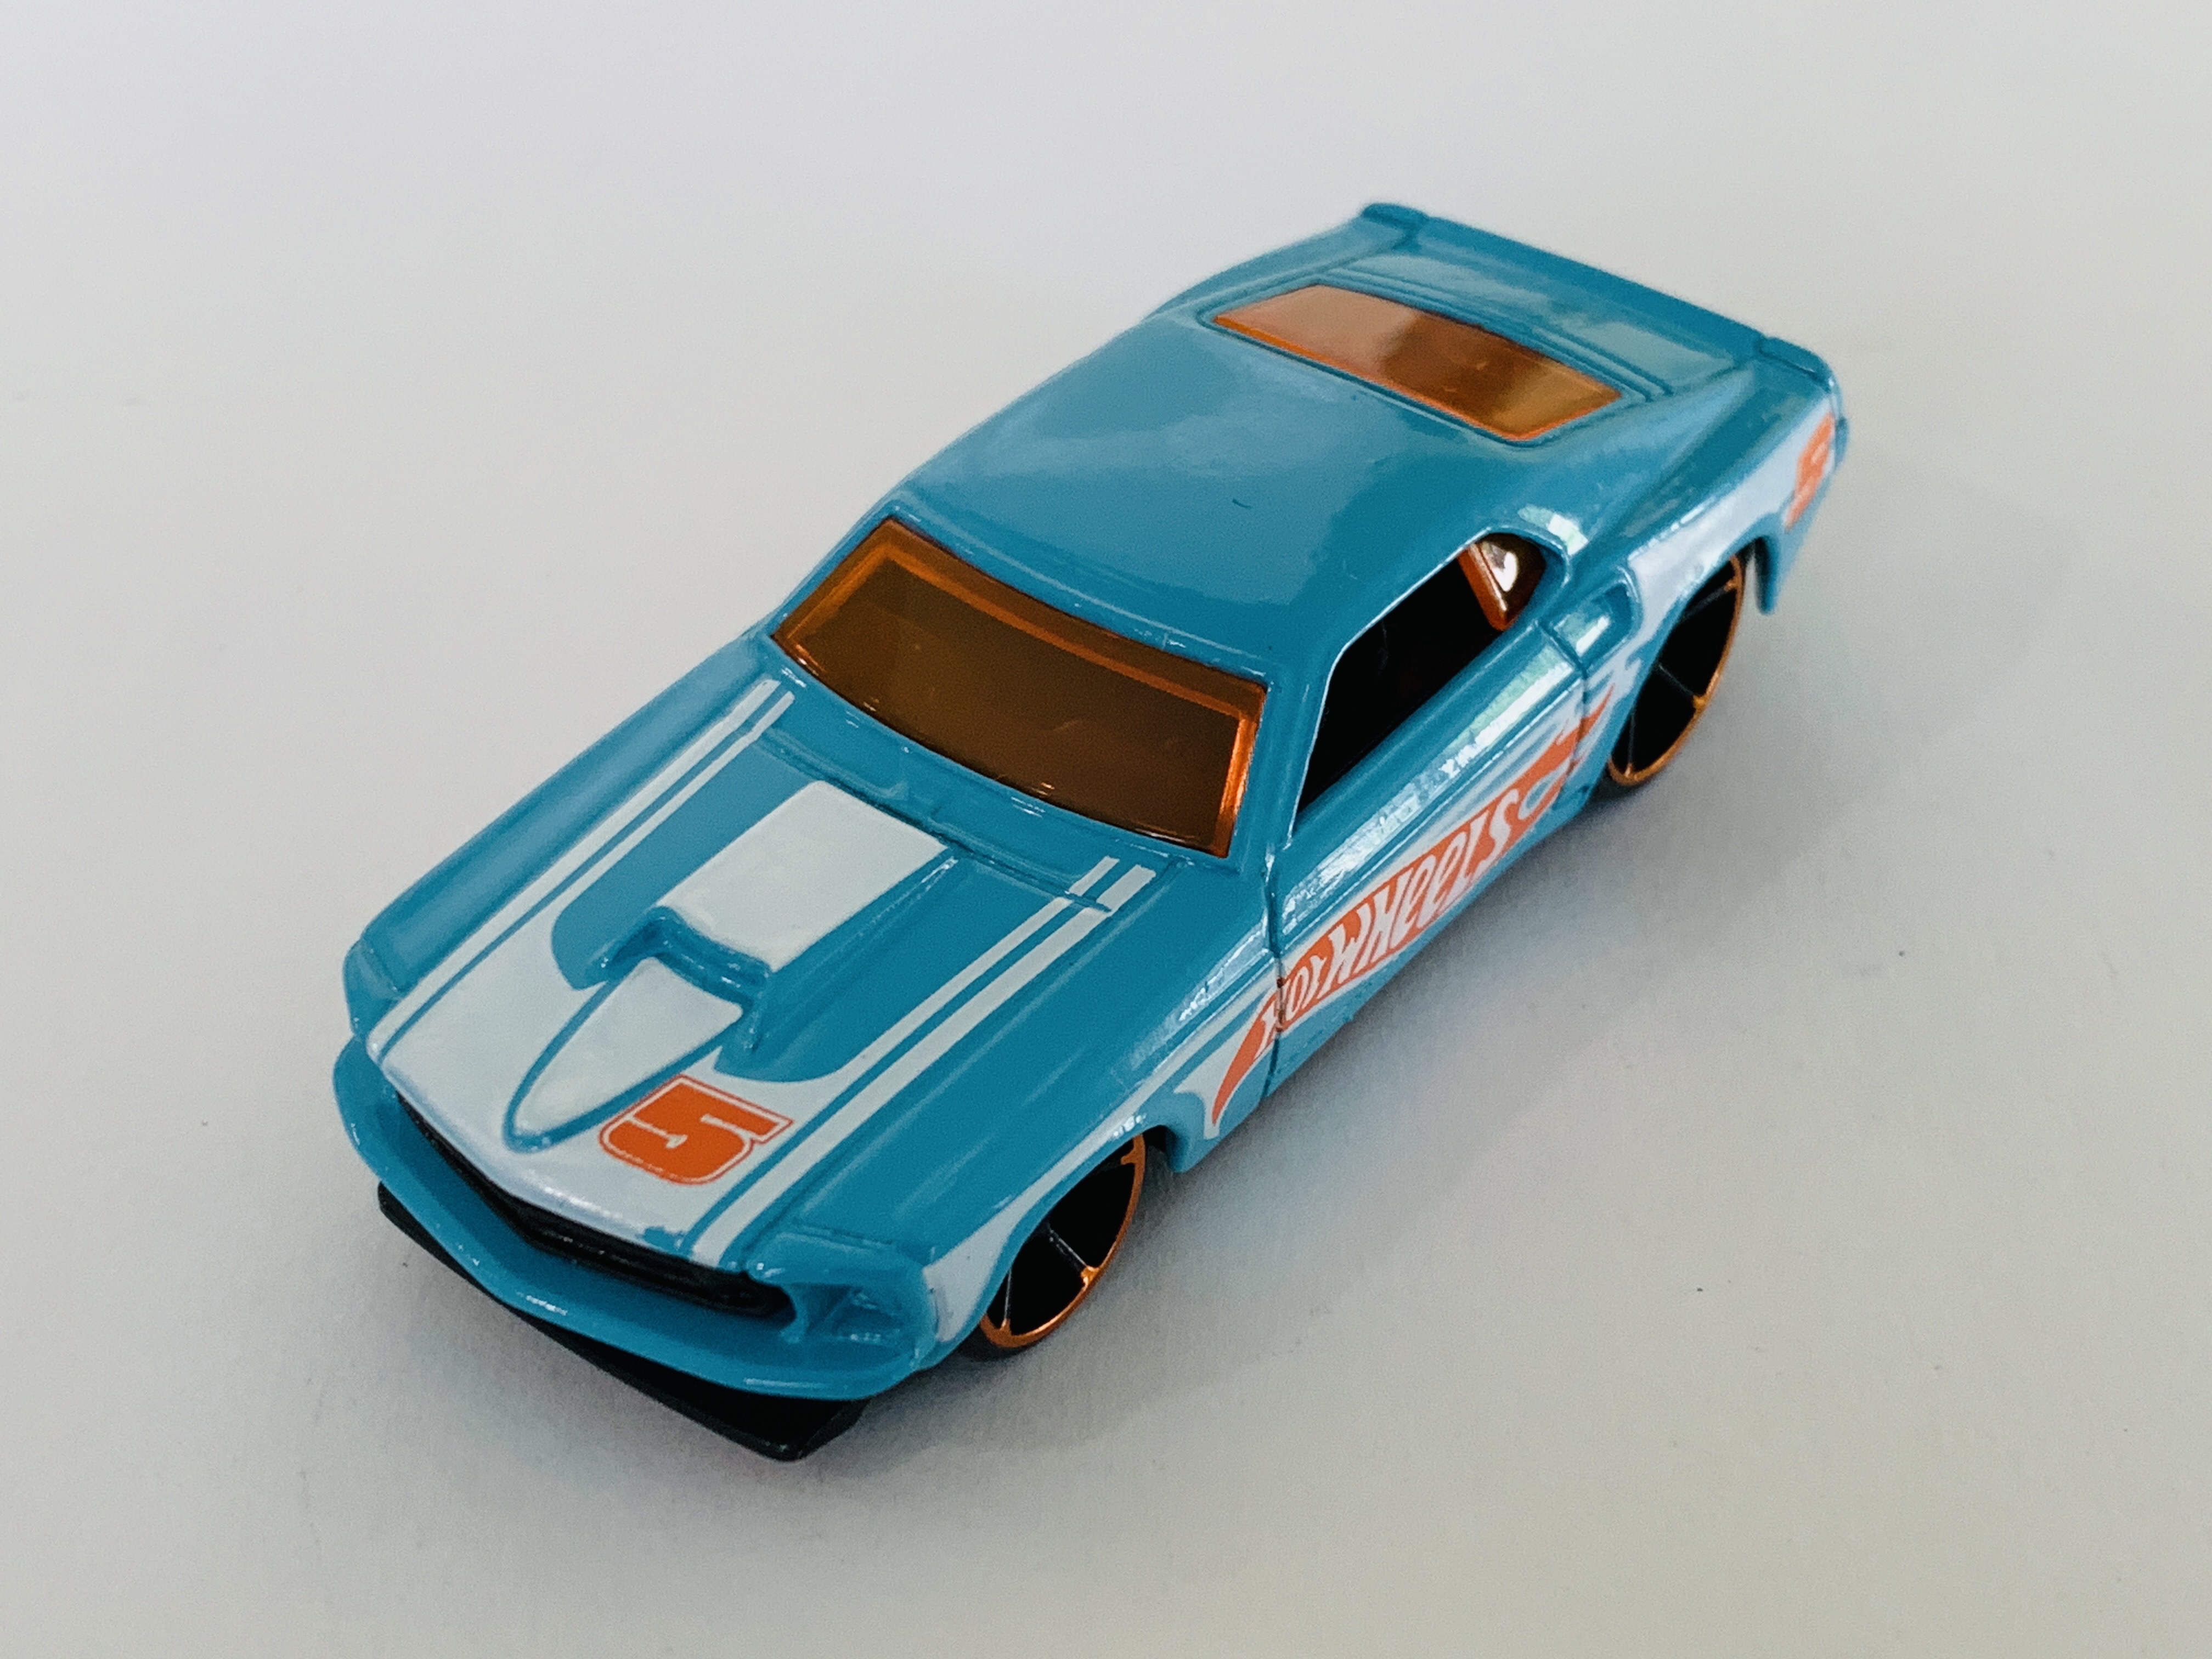 Hot Wheels '69 Ford Mustang Mystery Car